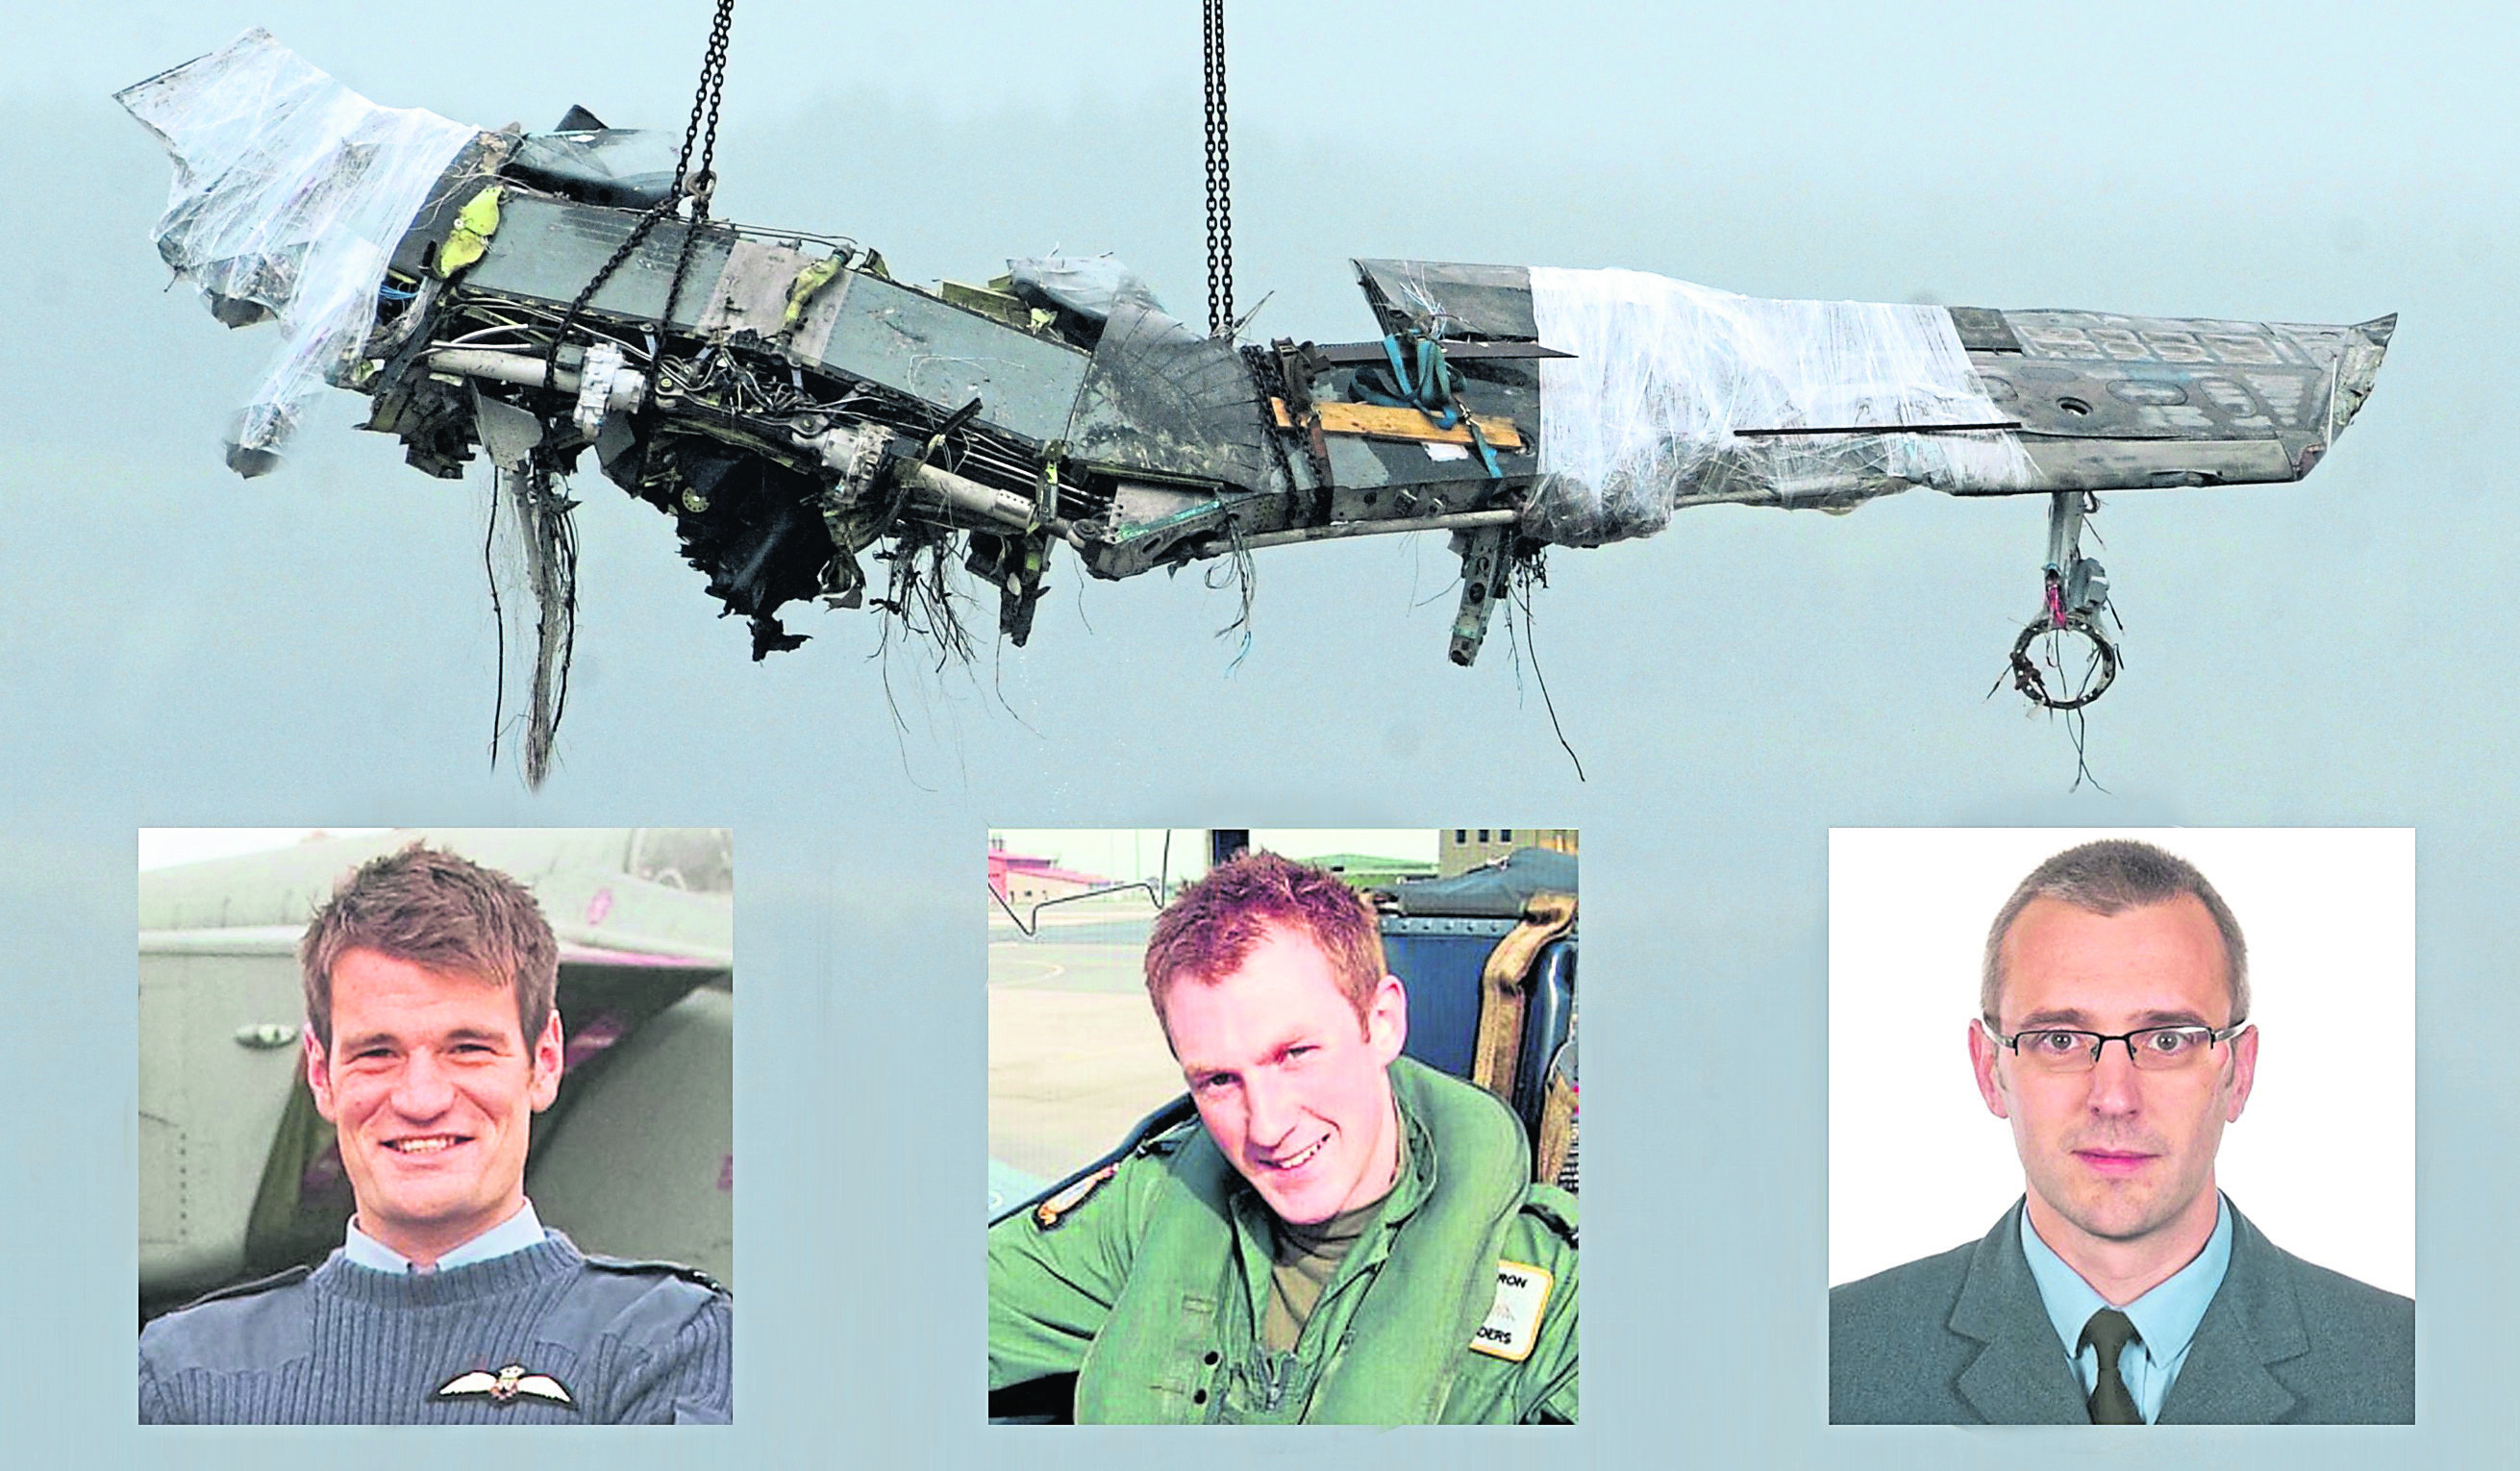 Flight Lieutenant Hywel Poole (left), Flight Lieutenant Adam Sanders (centre) and Squadron Leader Samuel Bailey (right) who were killed after a Tornado crash in the Moray Firth.